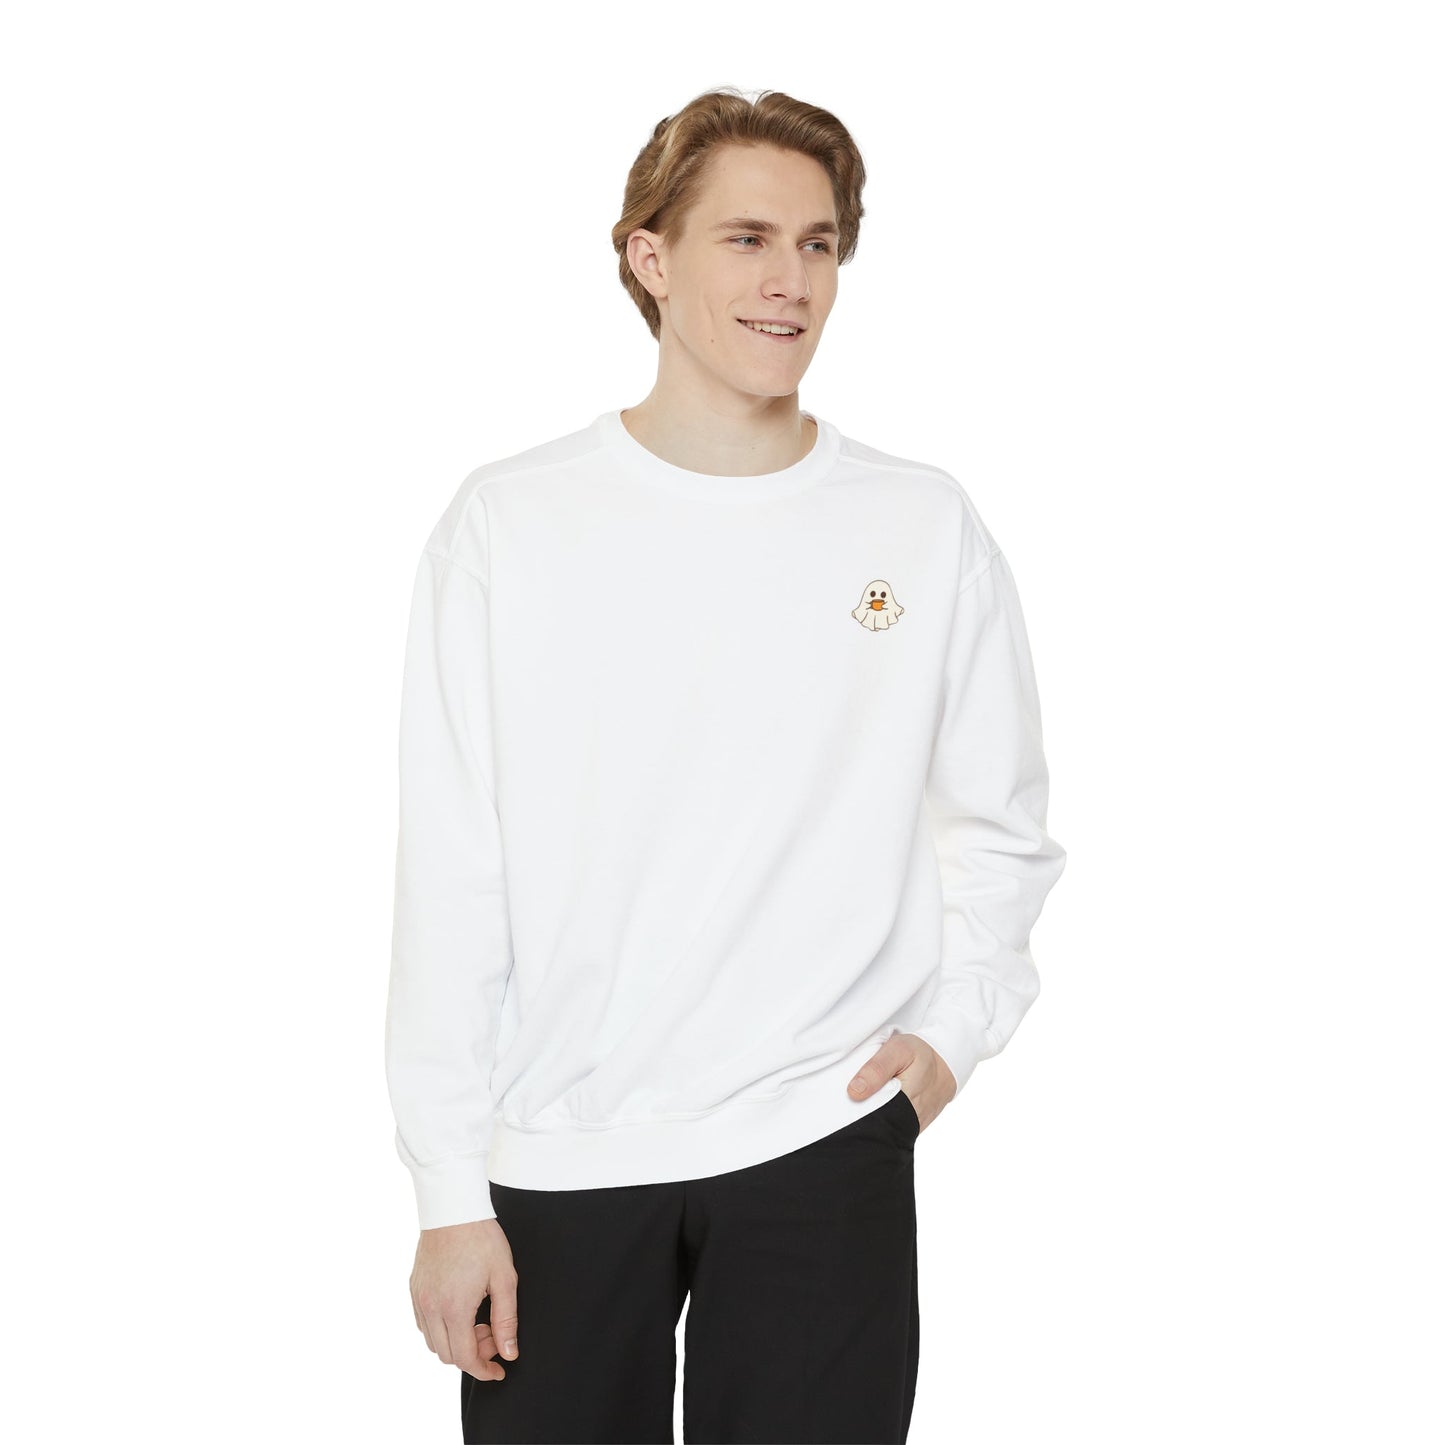 Get trendy with Ghost drinking coffee Sweatshirt - Sweatshirt available at Good Gift Company. Grab yours for $38.95 today!